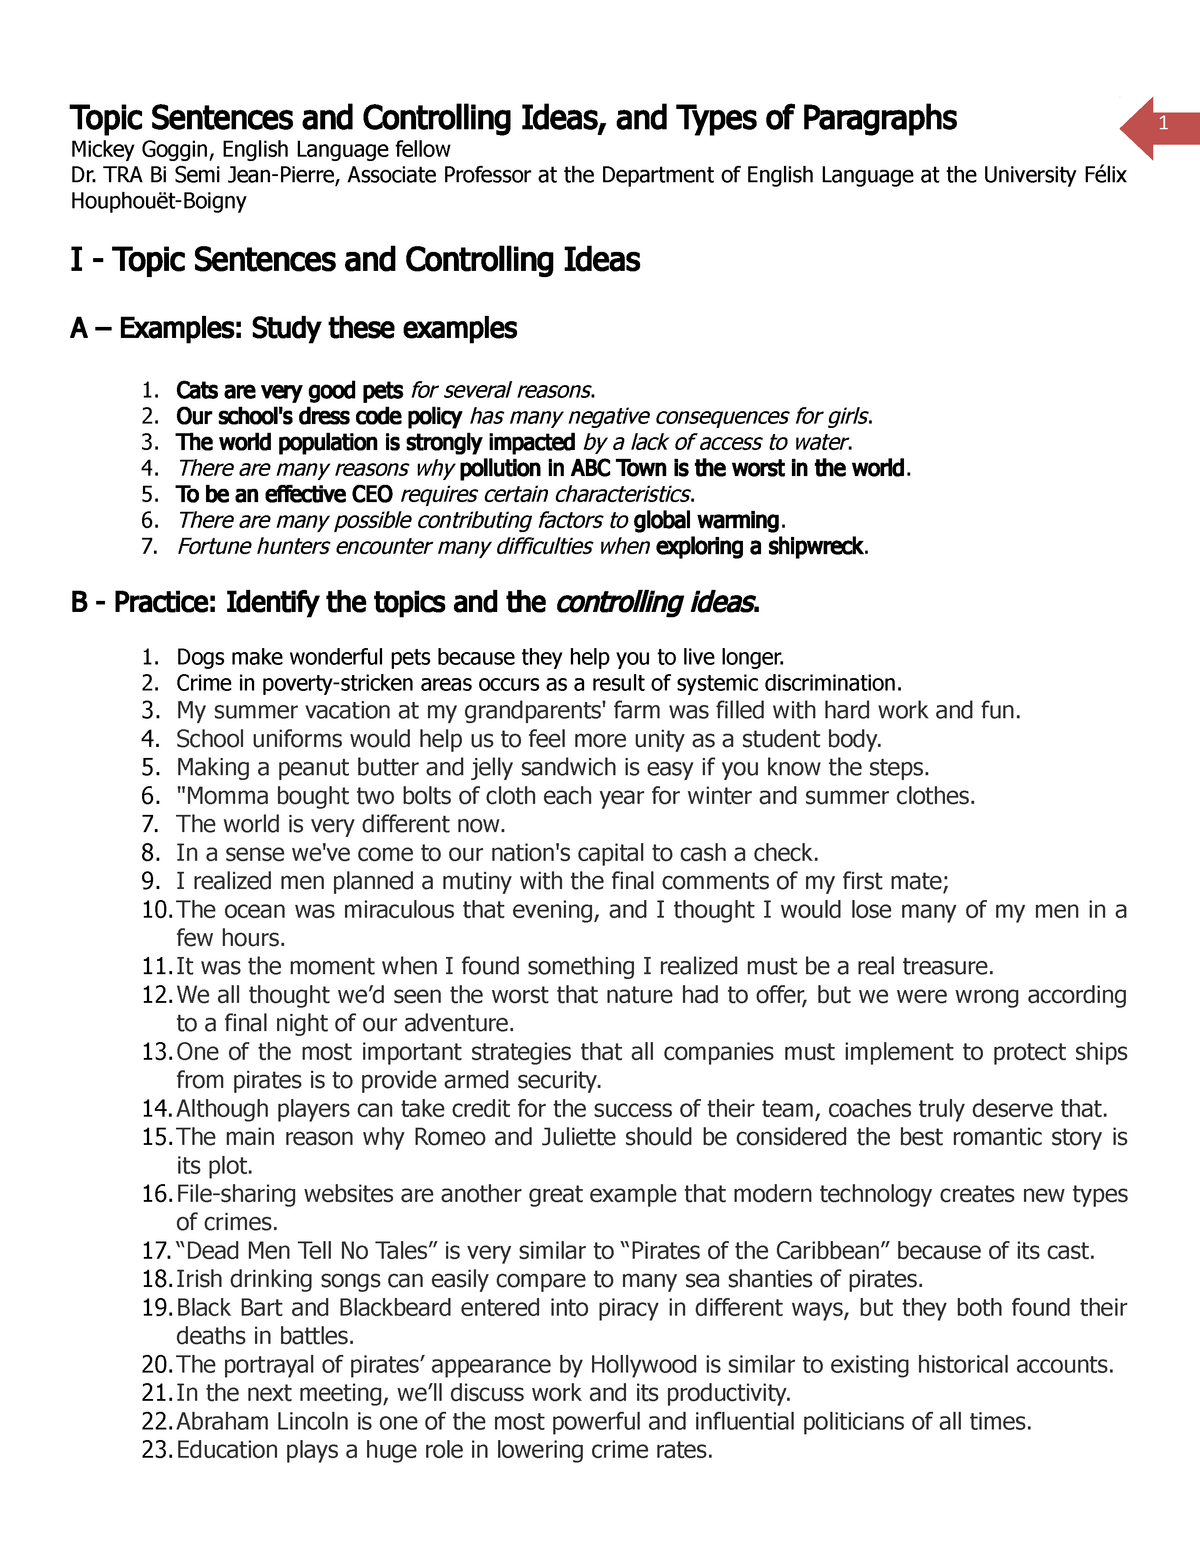 topic-sentences-and-controlling-ideas-types-of-paragraphs-topic